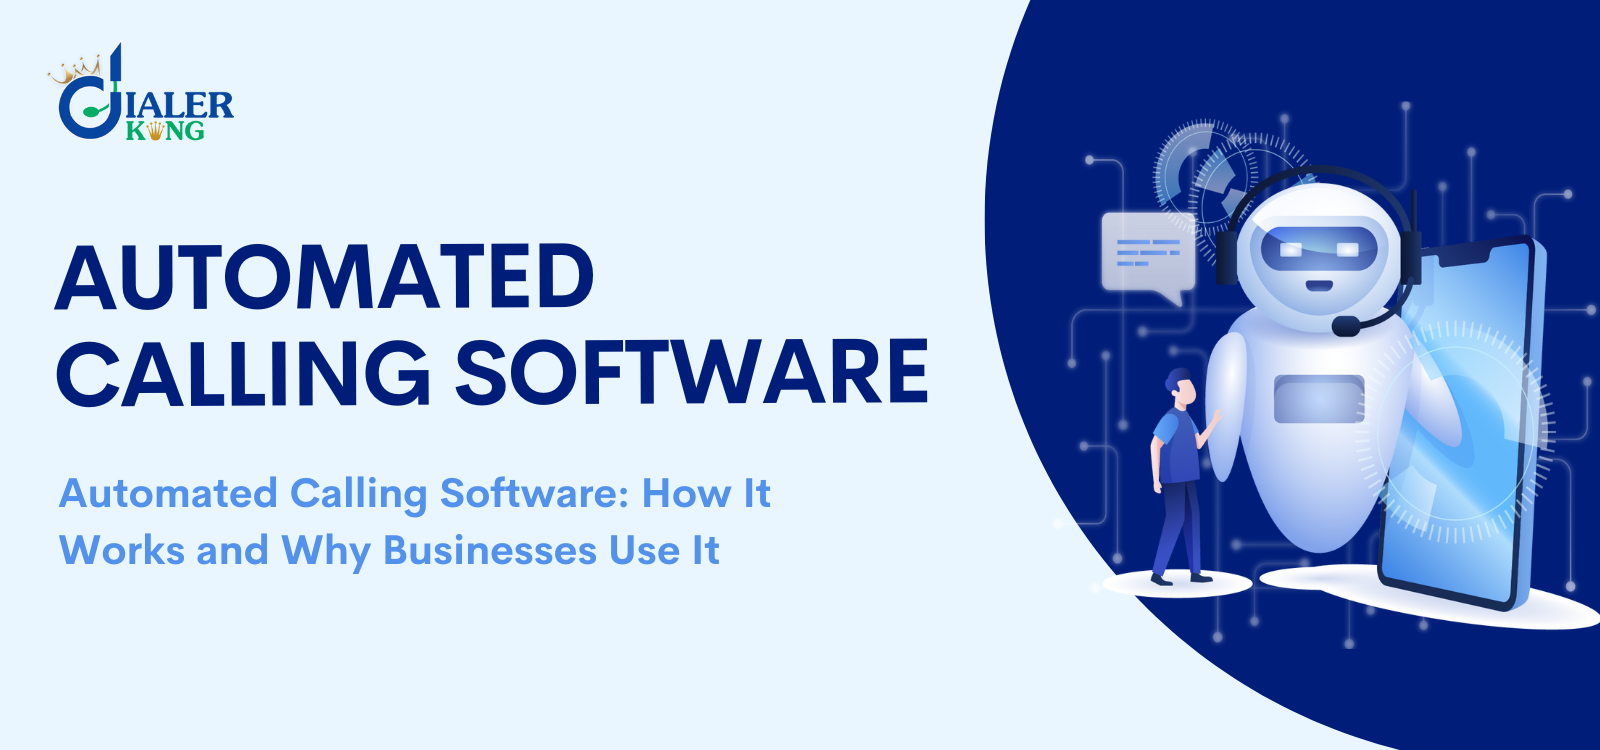 Automated Calling Software How It Works and Why Businesses Use It.